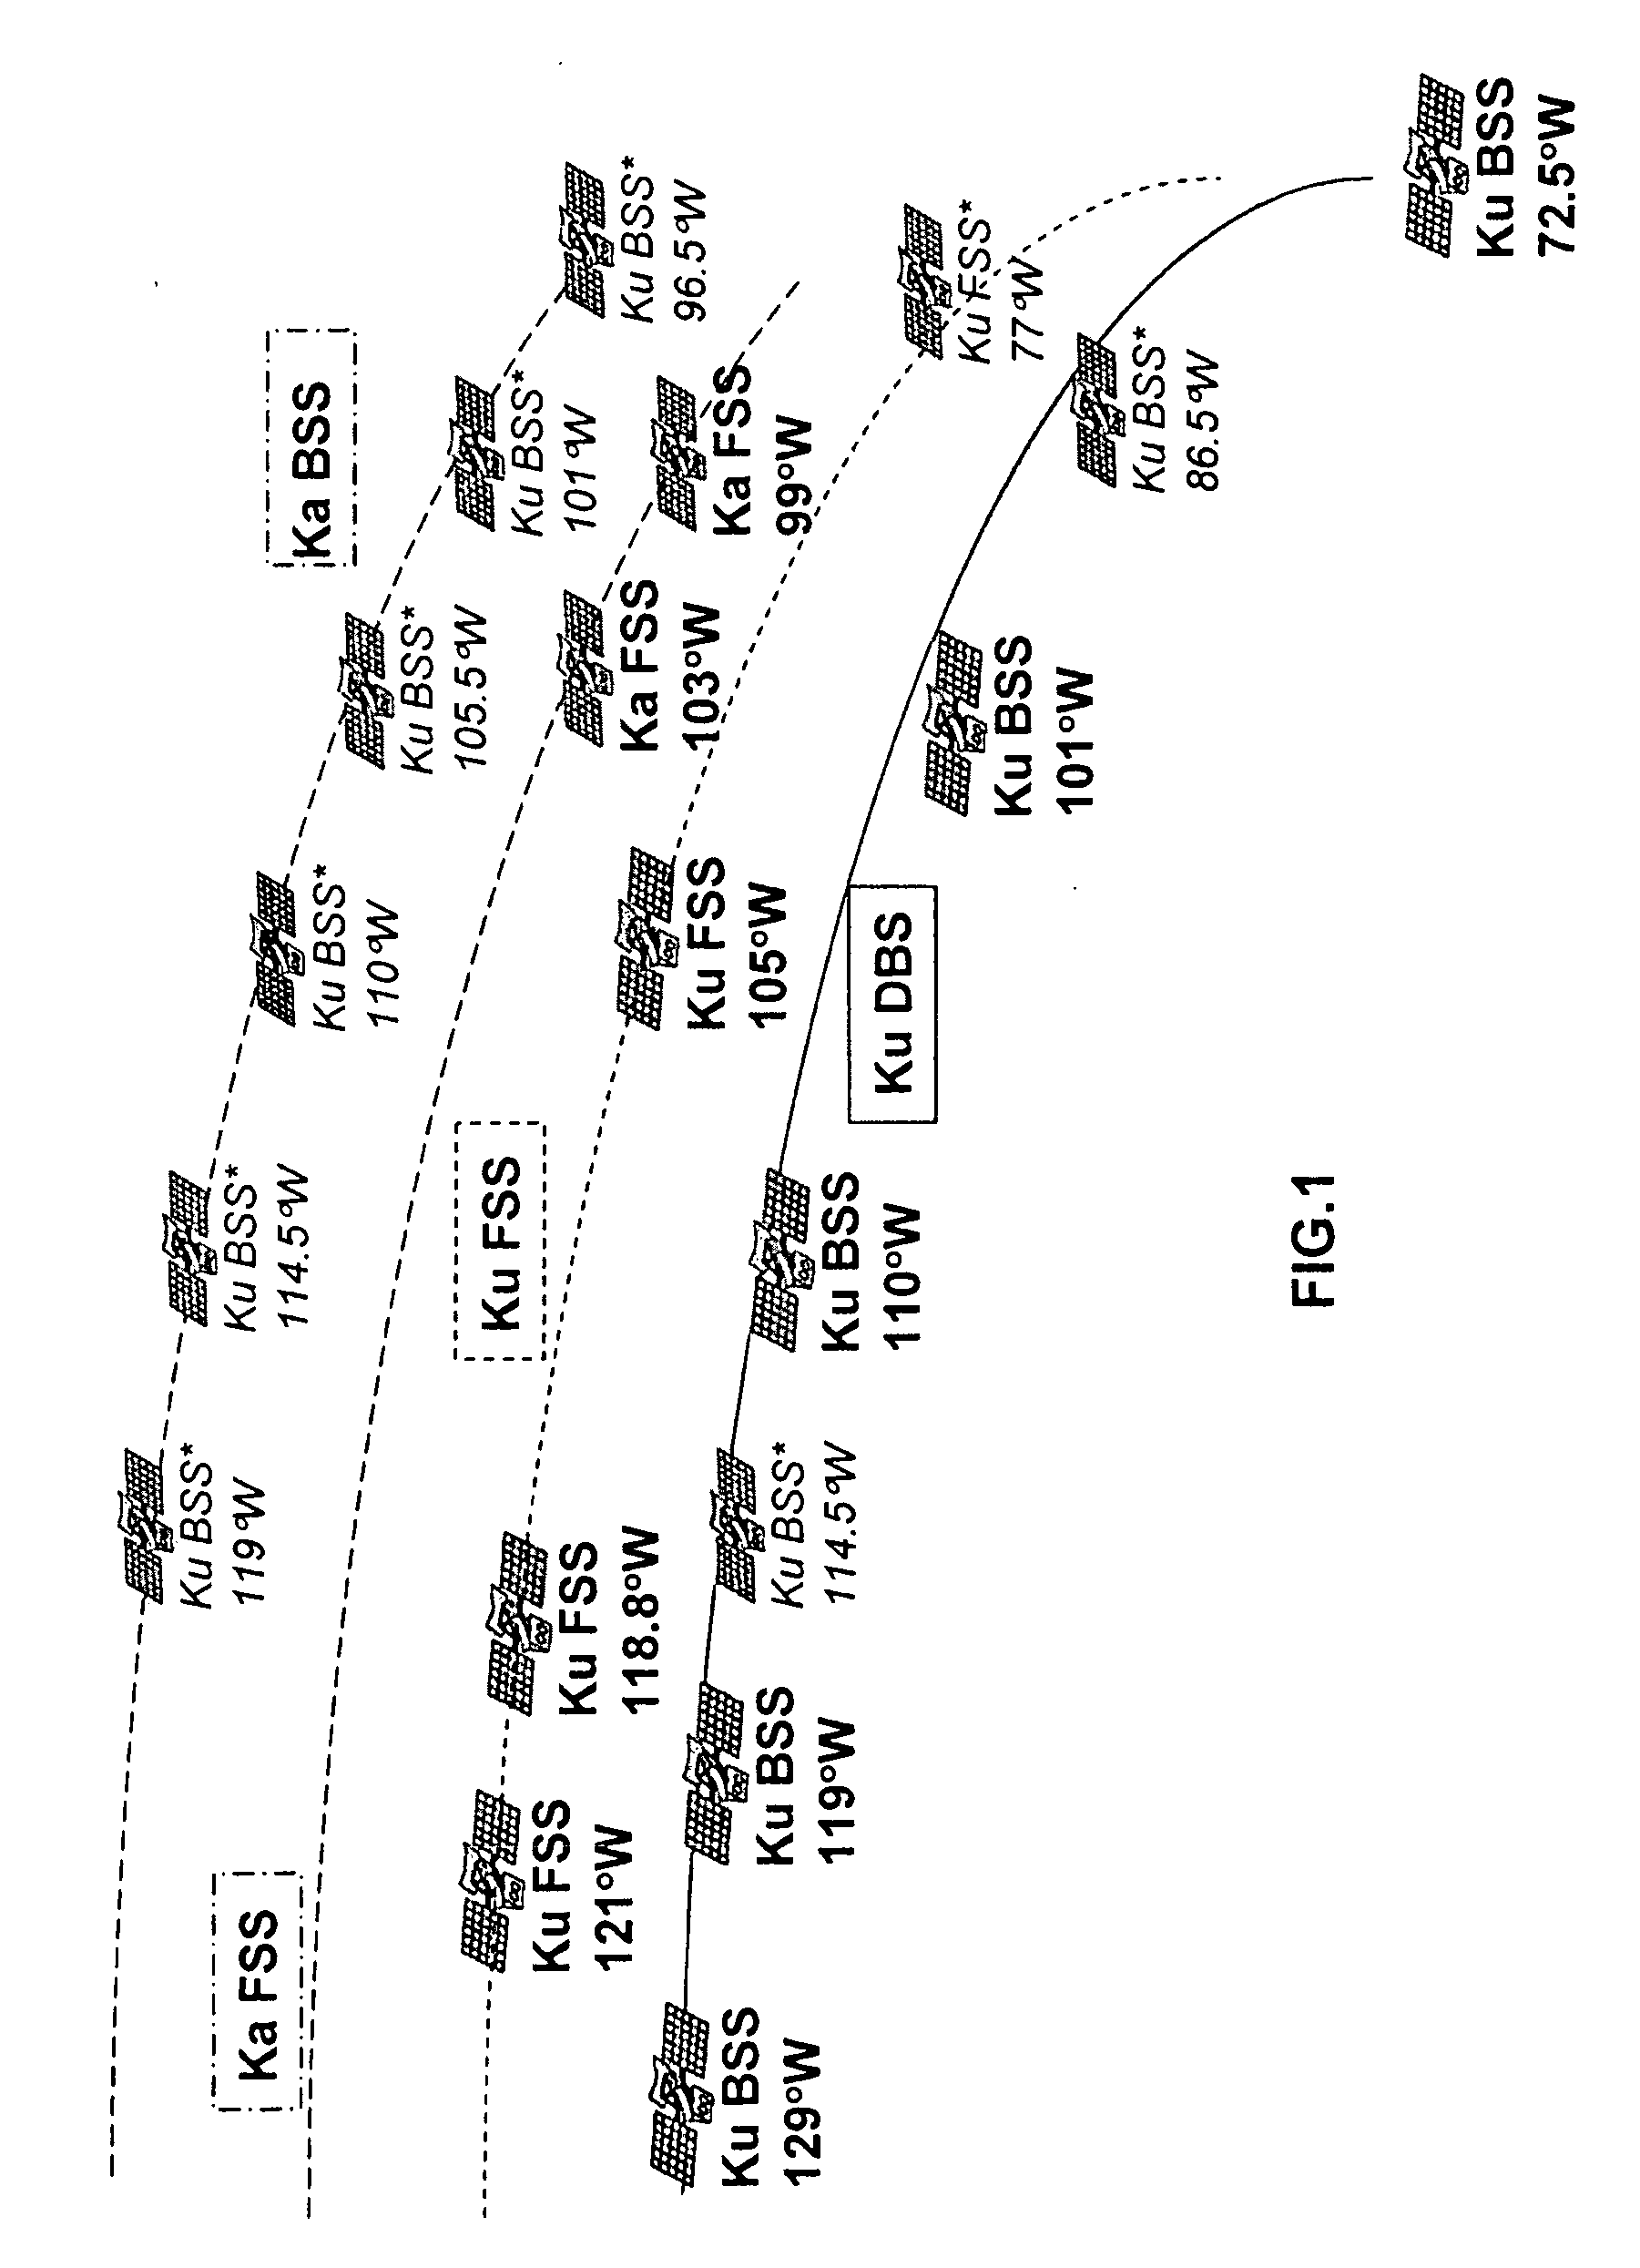 Integrated multi-beam antenna receiving system with improved signal distribution